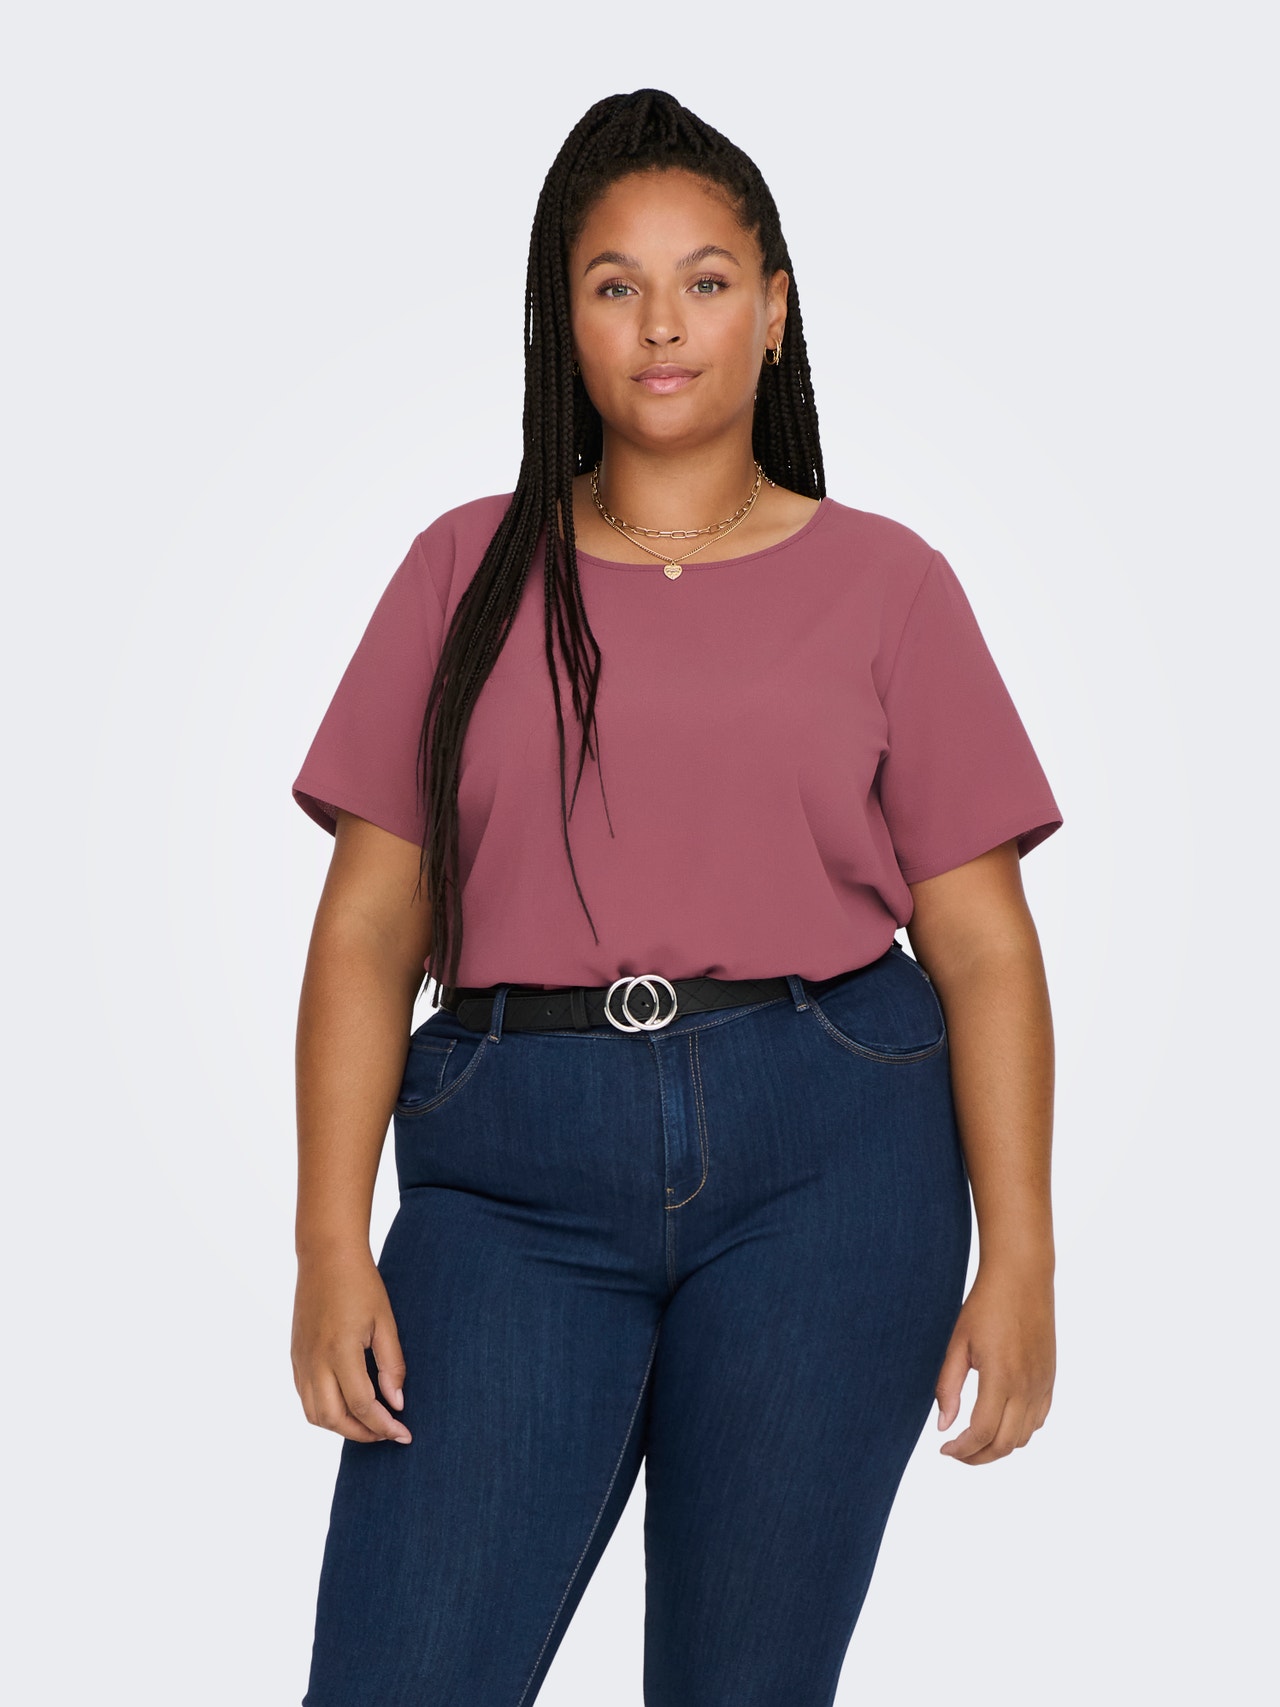 ONLY Curvy solid colored Short Sleeved Top -Renaissance Rose - 15256702